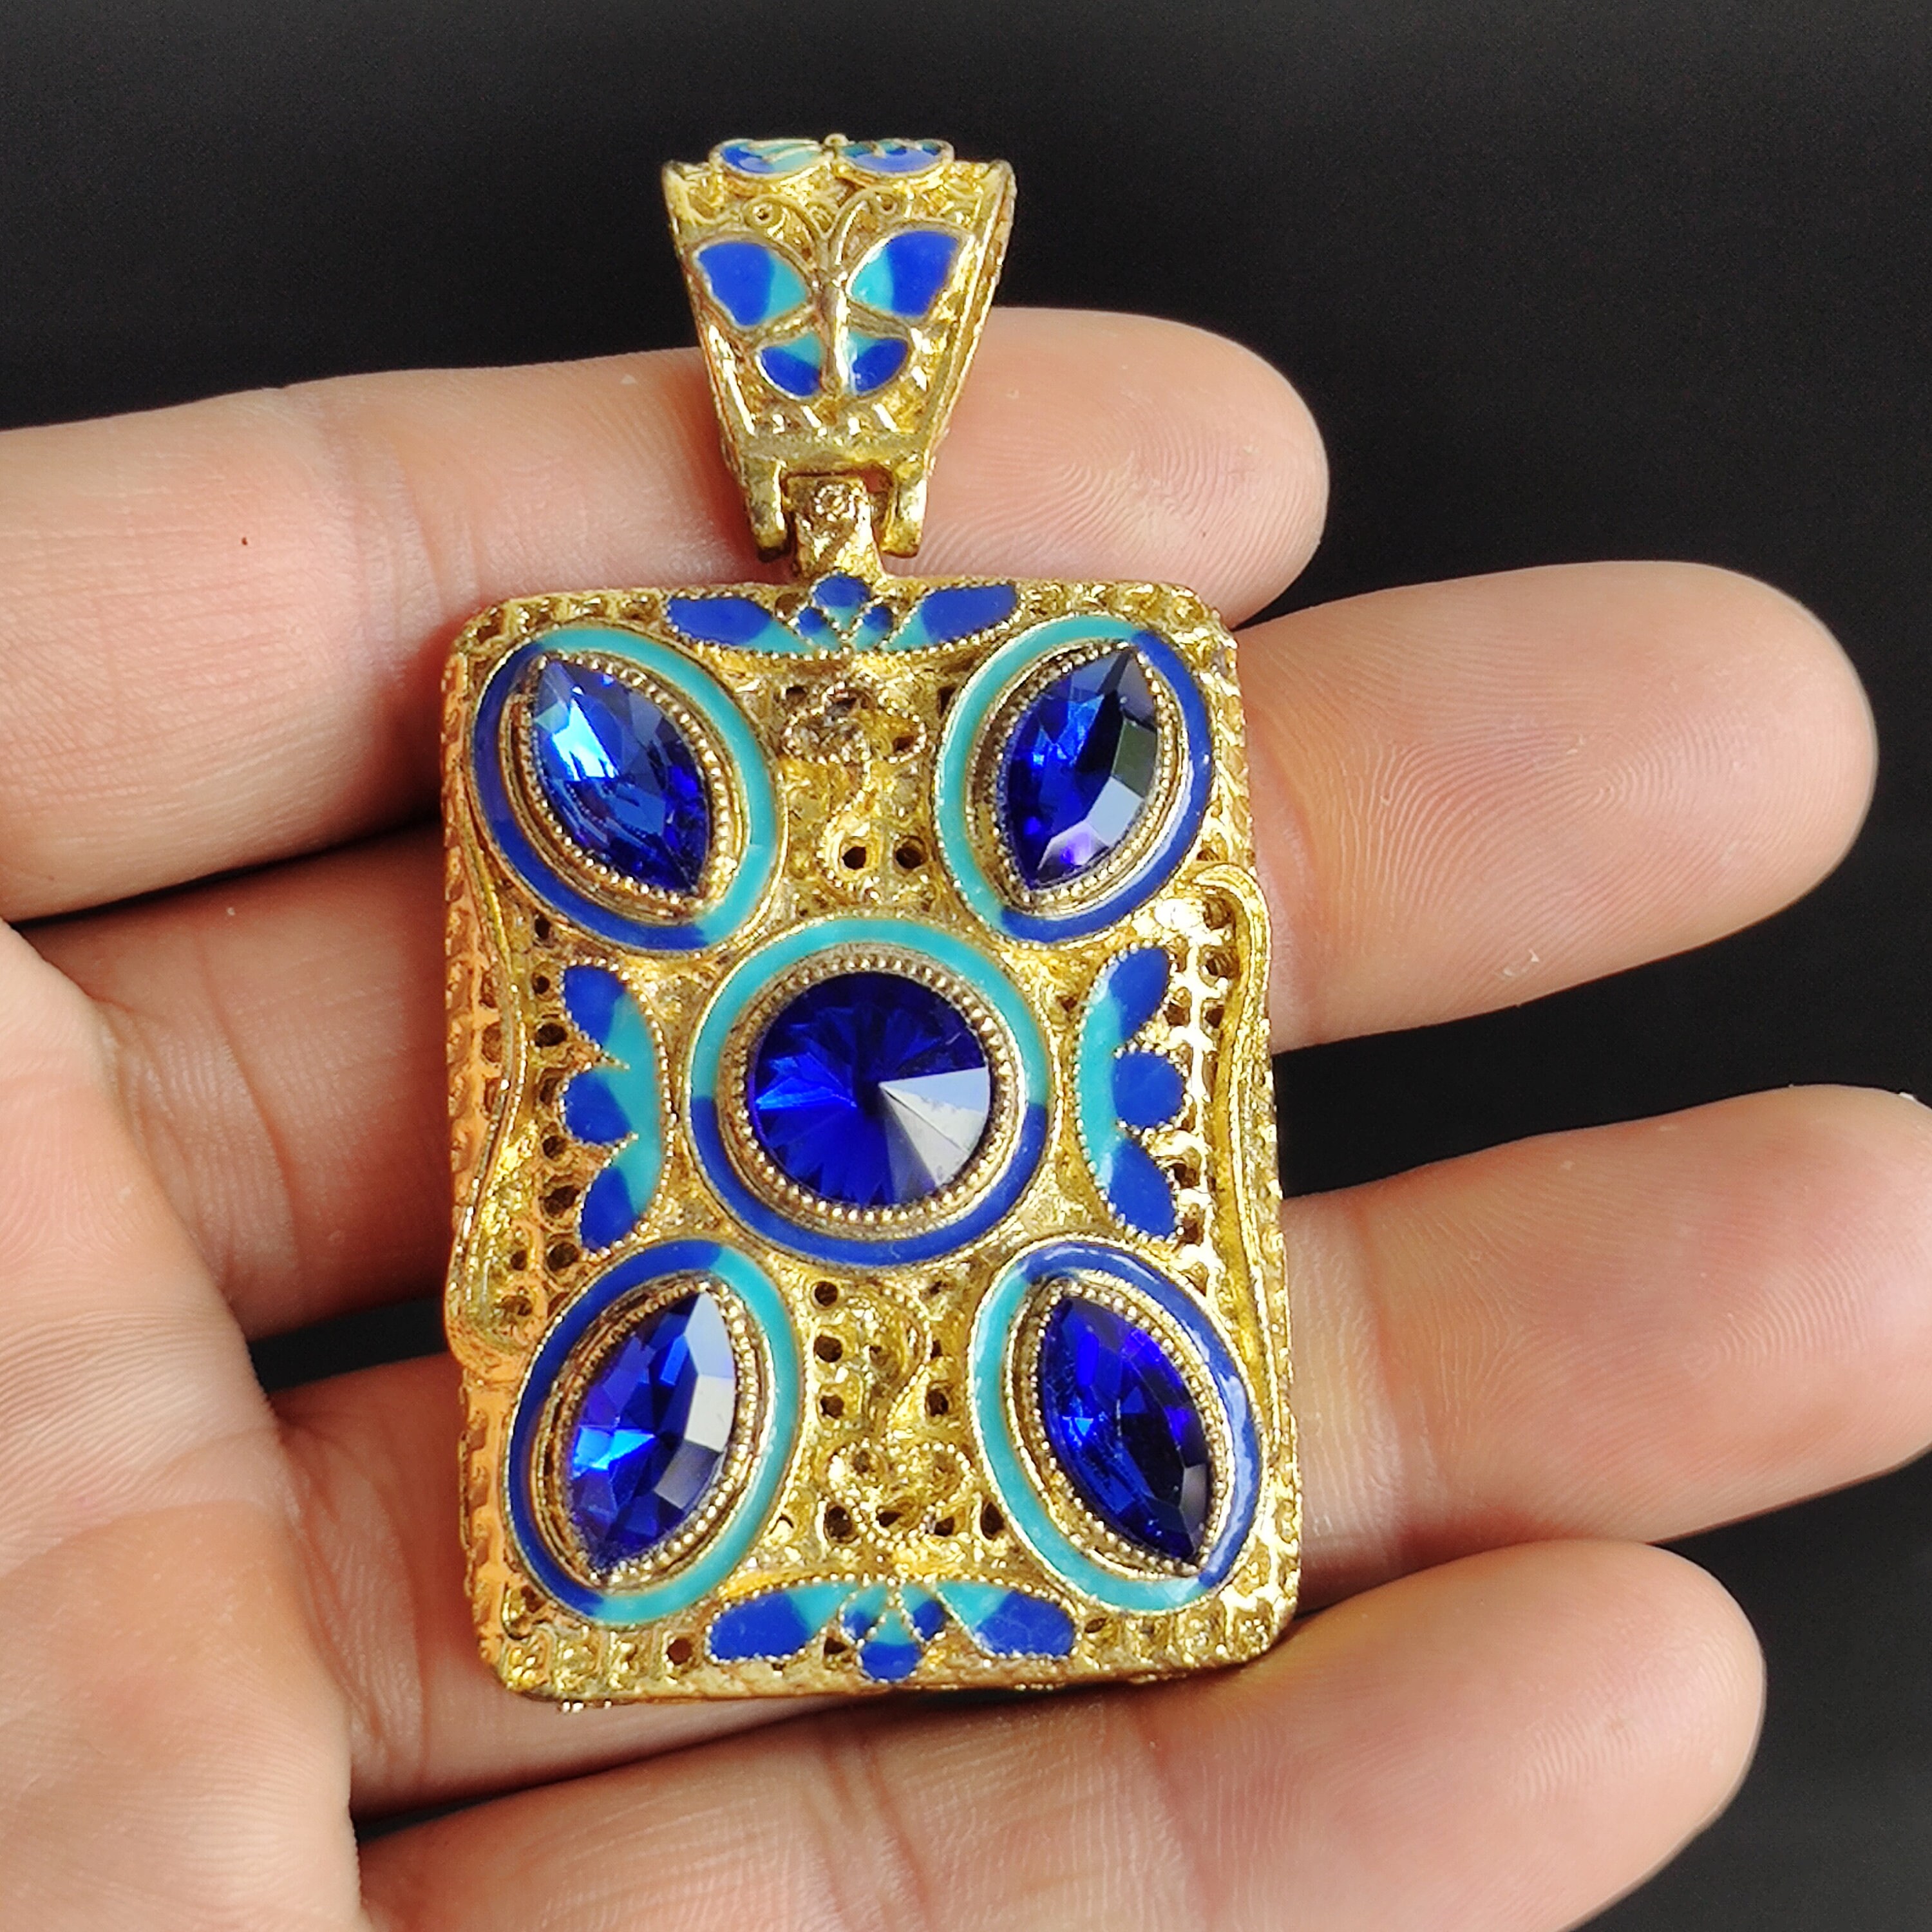 Collection of Chinese antique pure natural cloisonne inlaid gemstone pendant